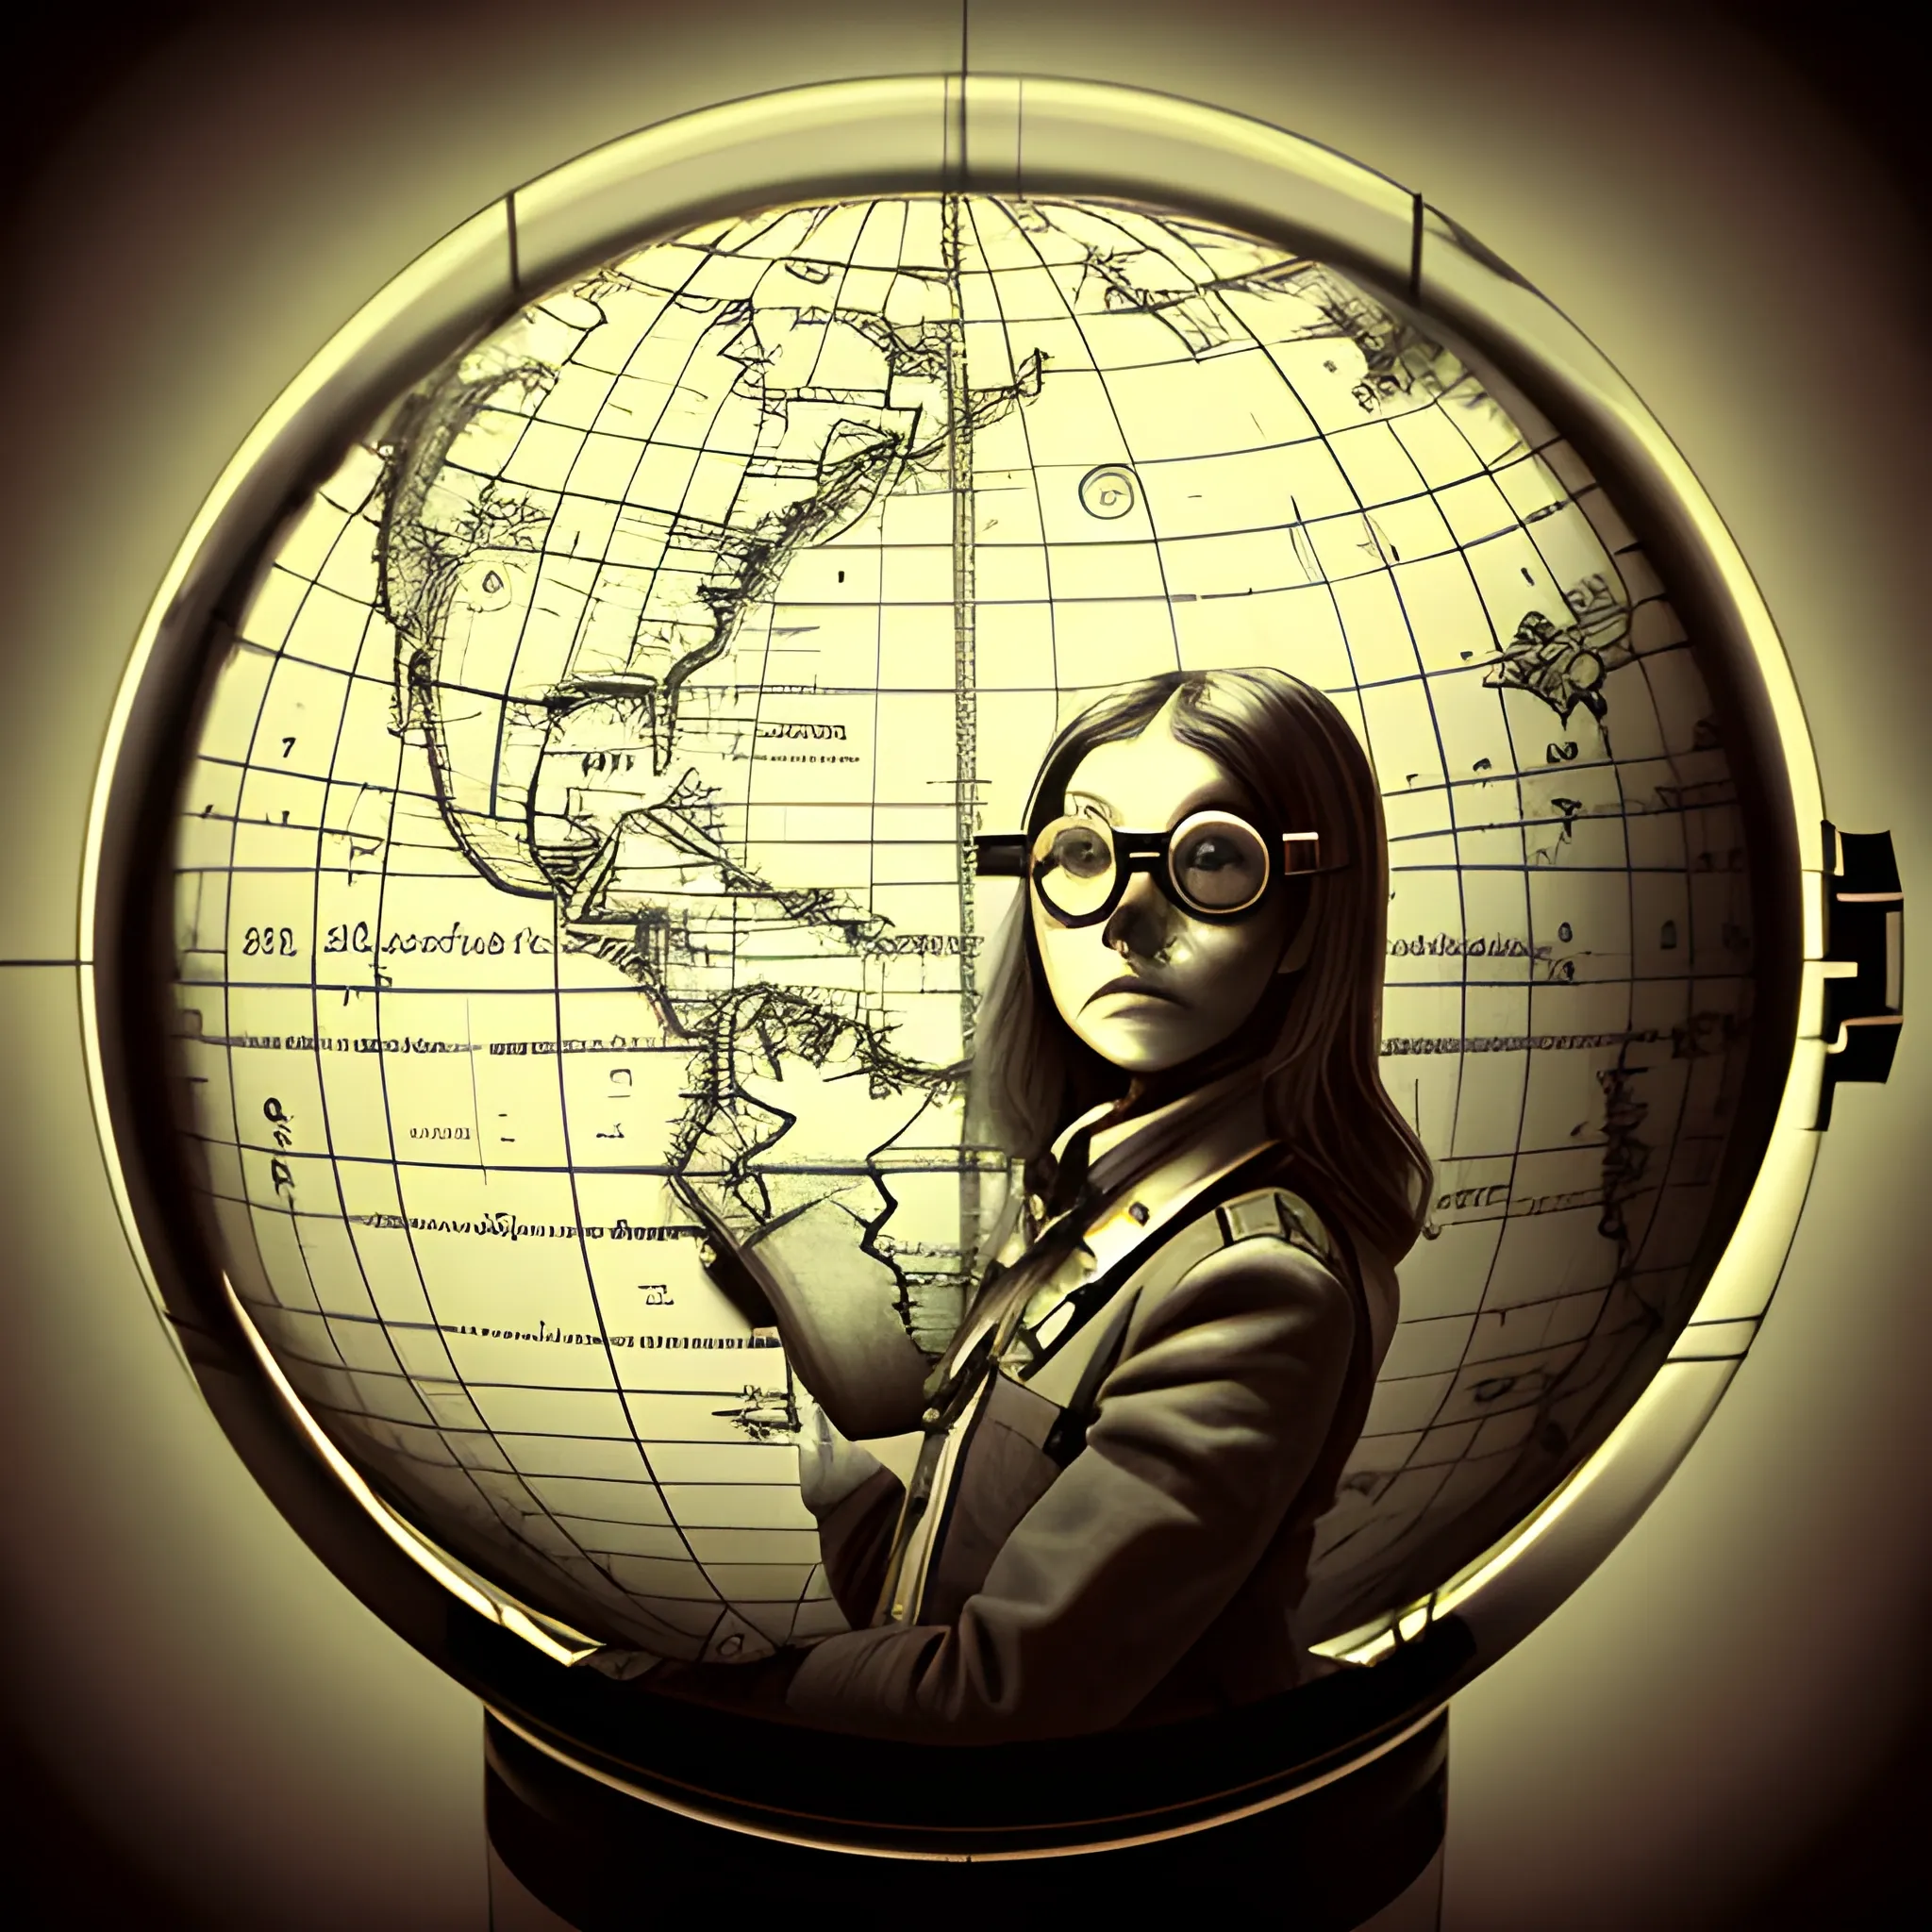 make a portrait of a female explorer standing by a window, leaning on a giant globe, compass glasses flying in the air, chaotic background, 3D, Trippy,  eerie atmosphere, close up, angular perspective , Pencil Sketch, Realism, Contemporary Documentary Photography